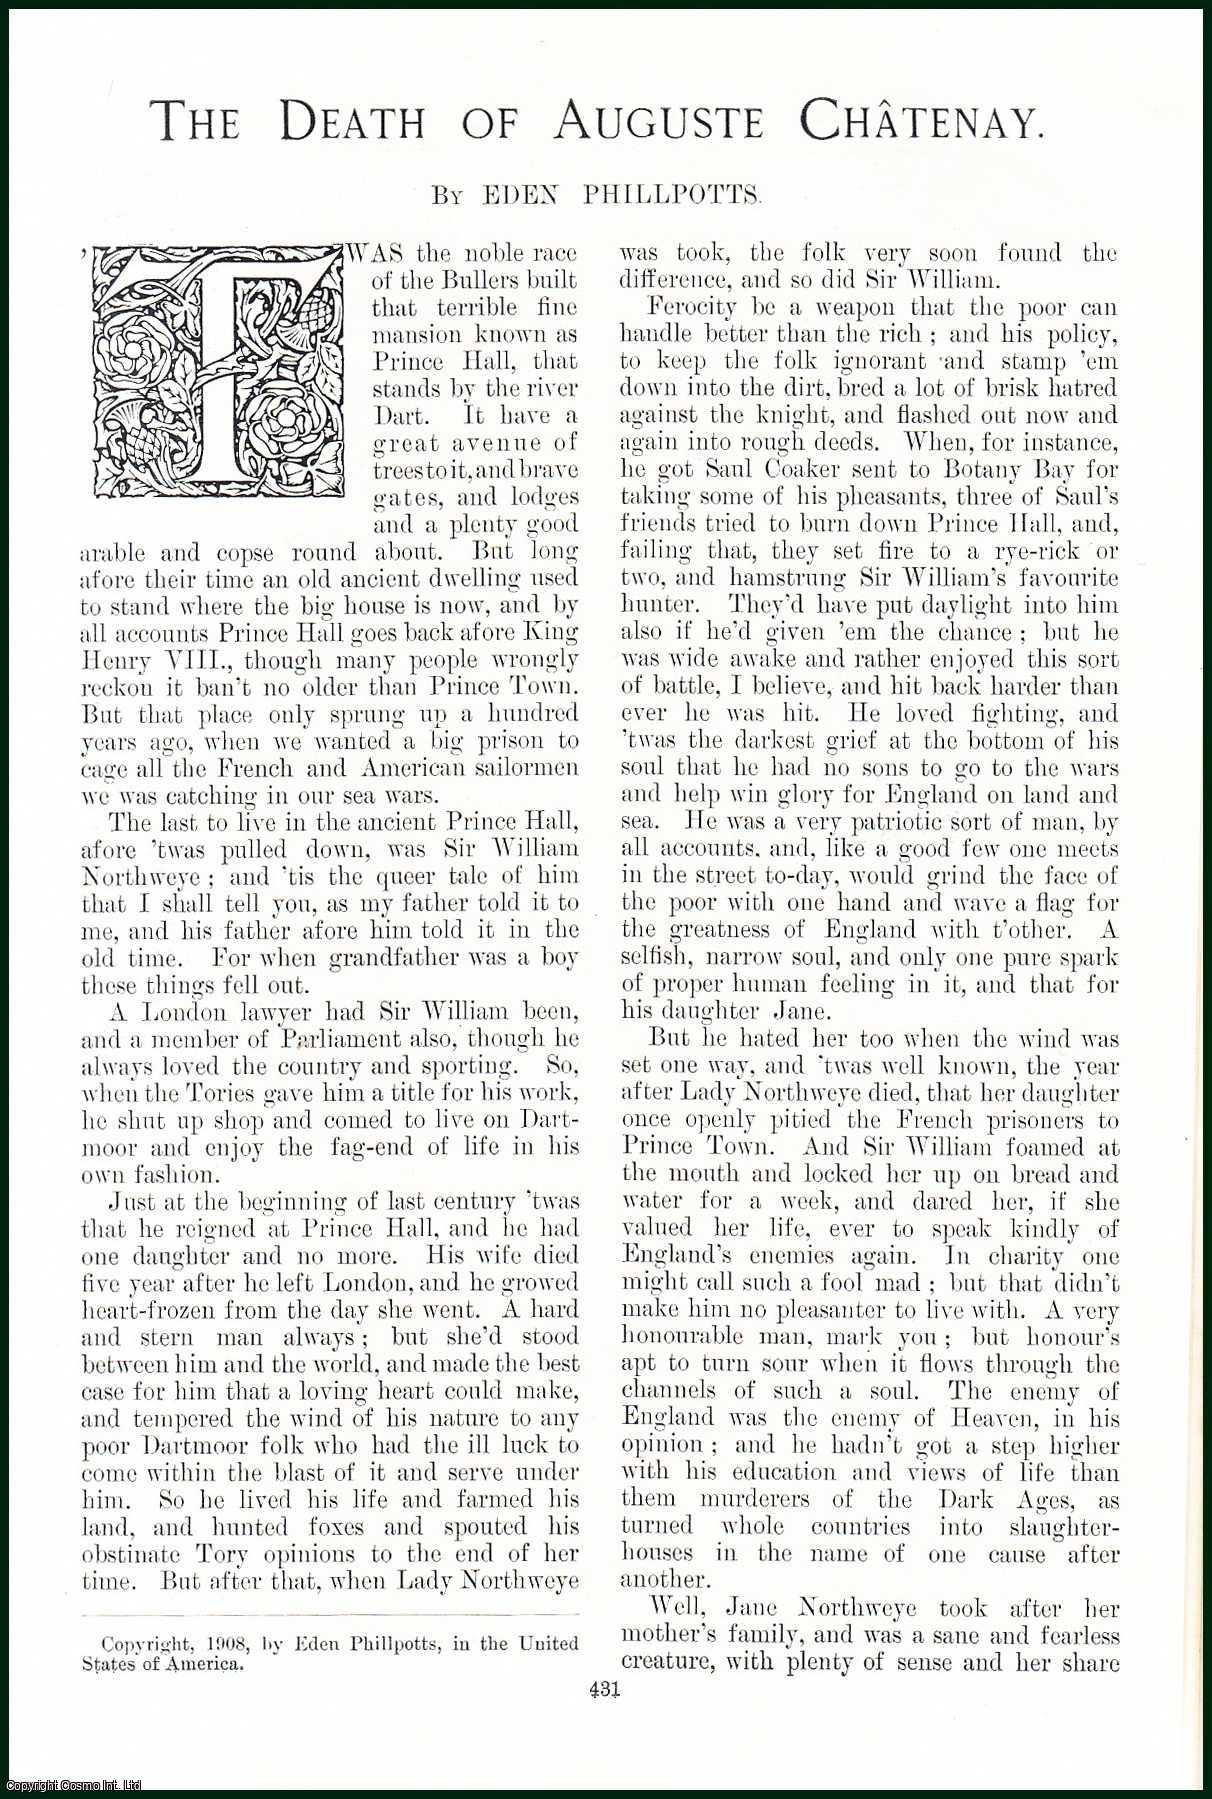 Eden Phillpotts - The Death of Auguste Chatenay : A Story, by Eden Phillpotts. An original article from the Windsor Magazine, 1908.